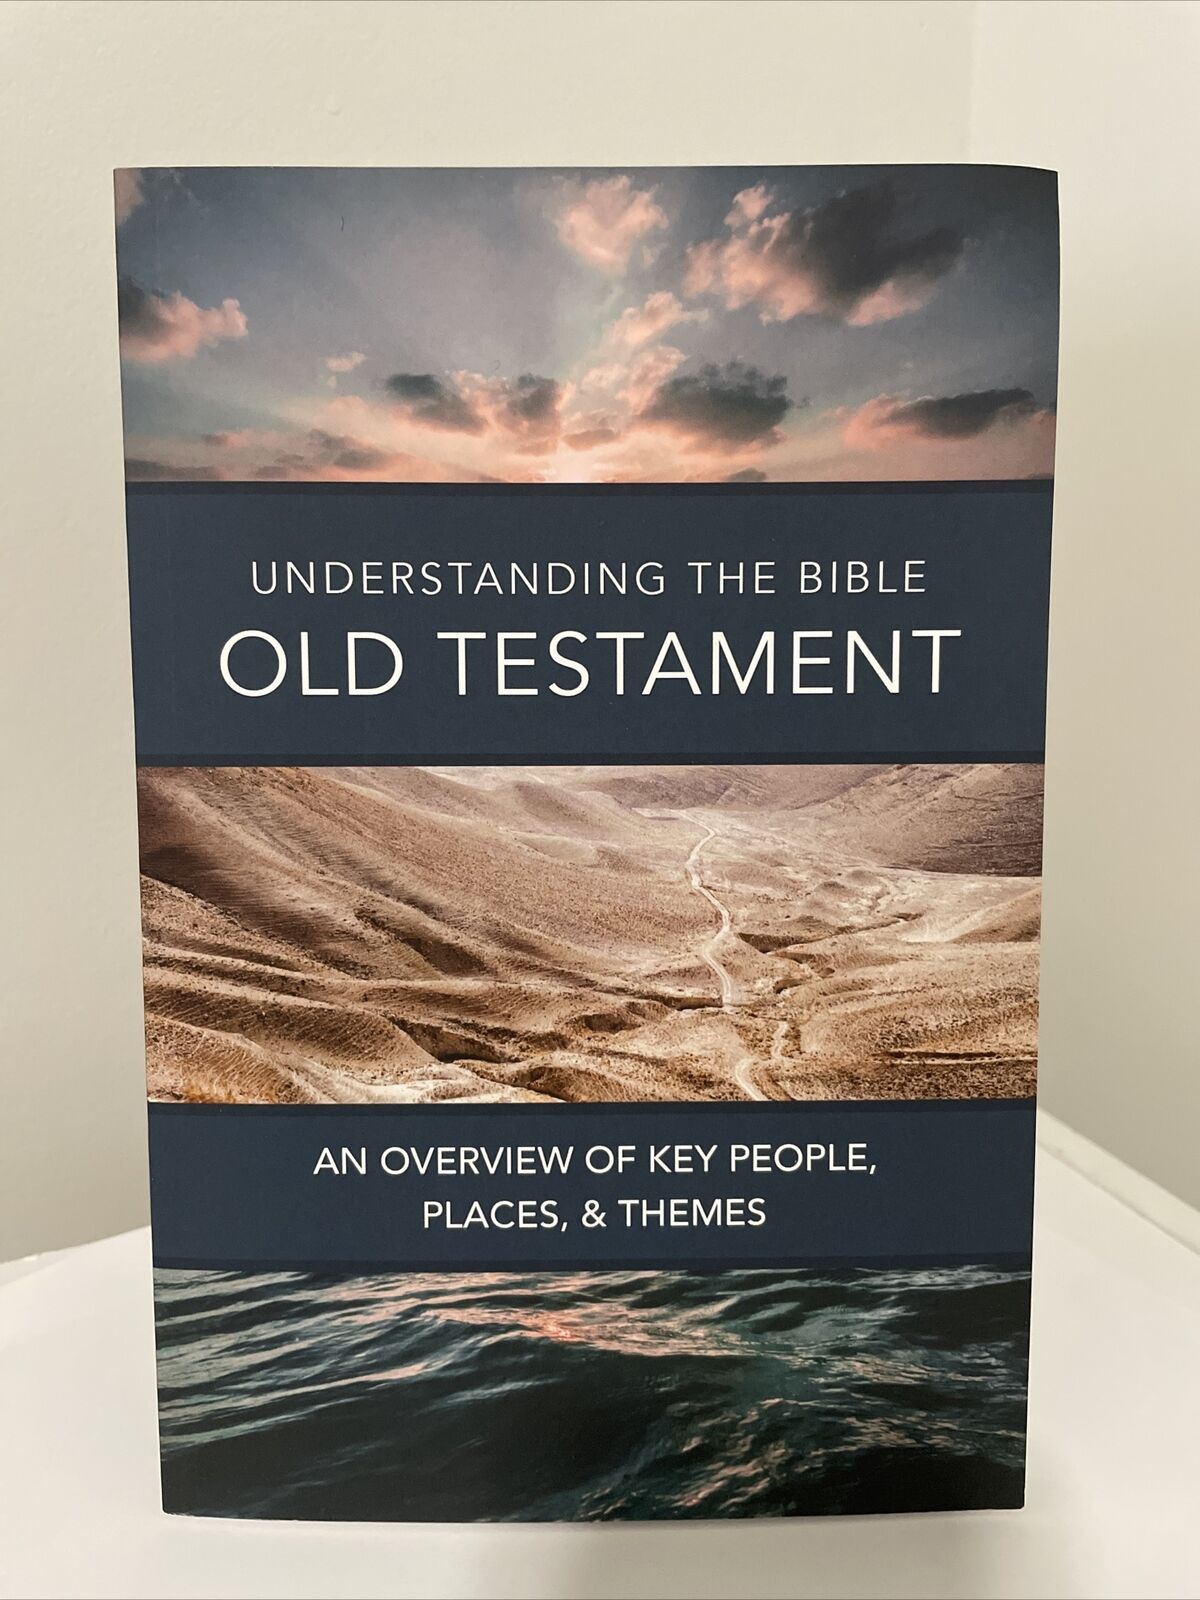 Understanding the Bible Old Testament An Overview of Key People, Places & Themes